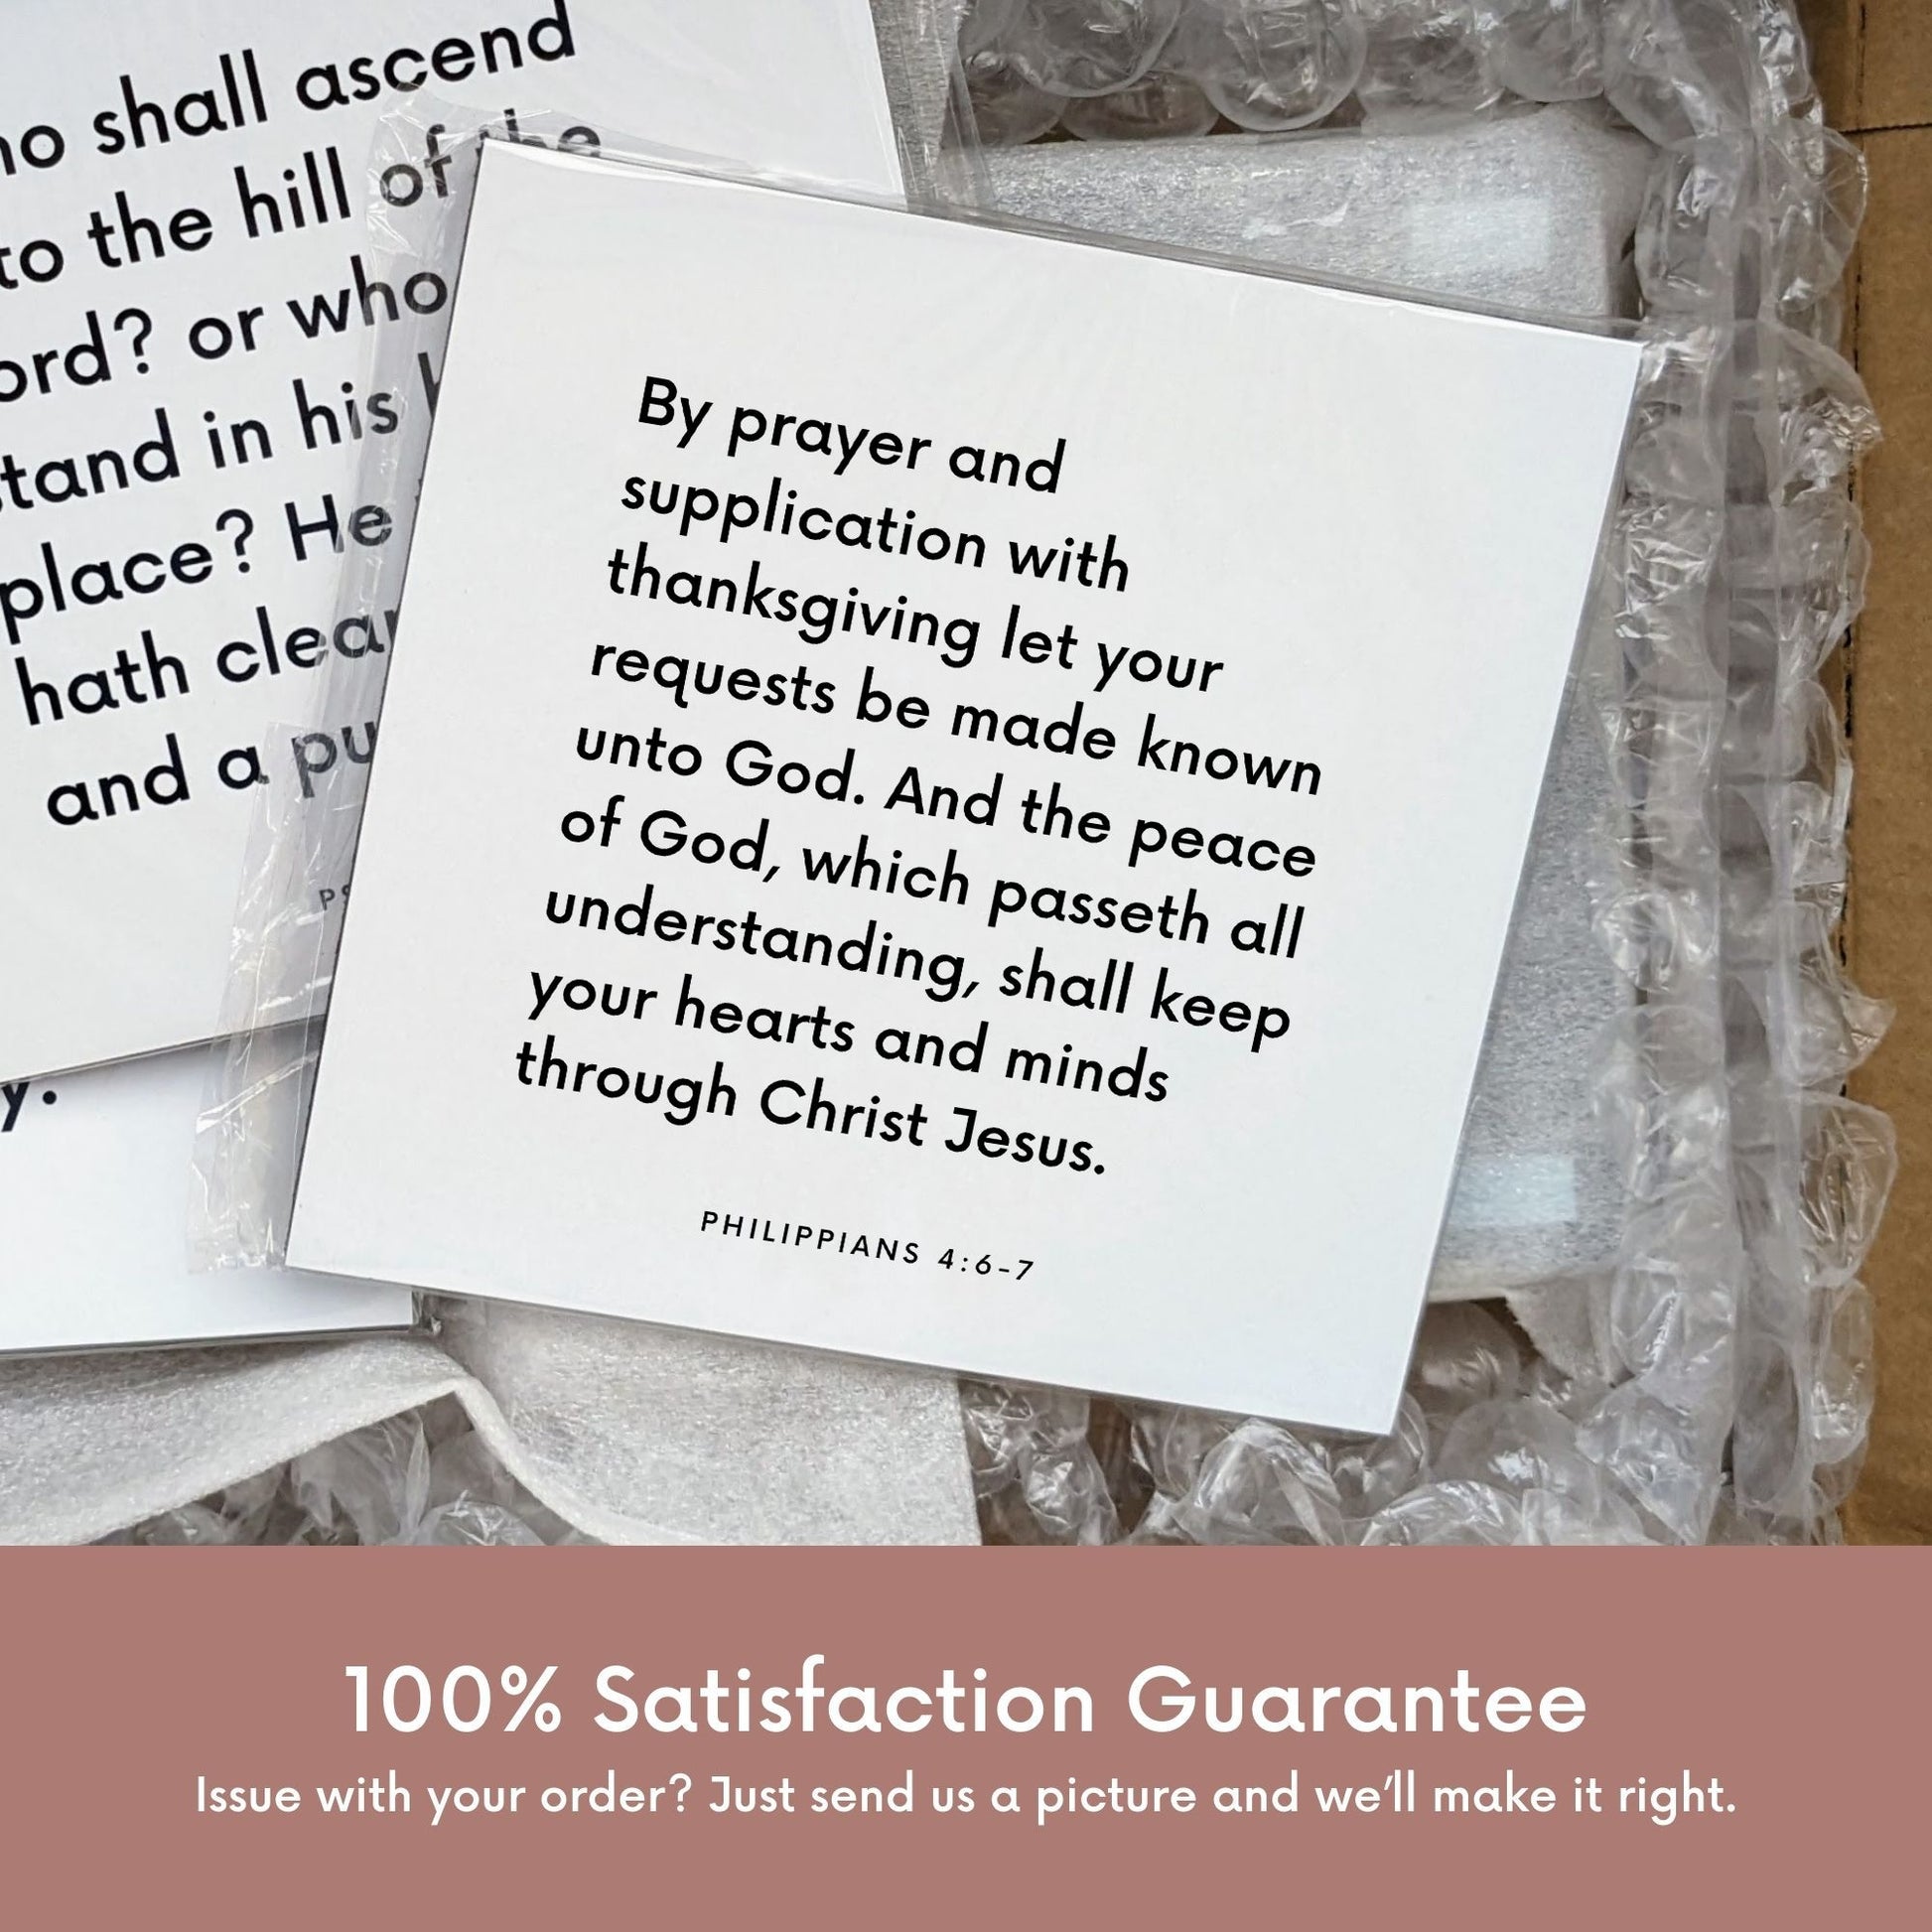 Shipping materials for scripture tile of Philippians 4:6-7 - "Let your requests be made known unto God"